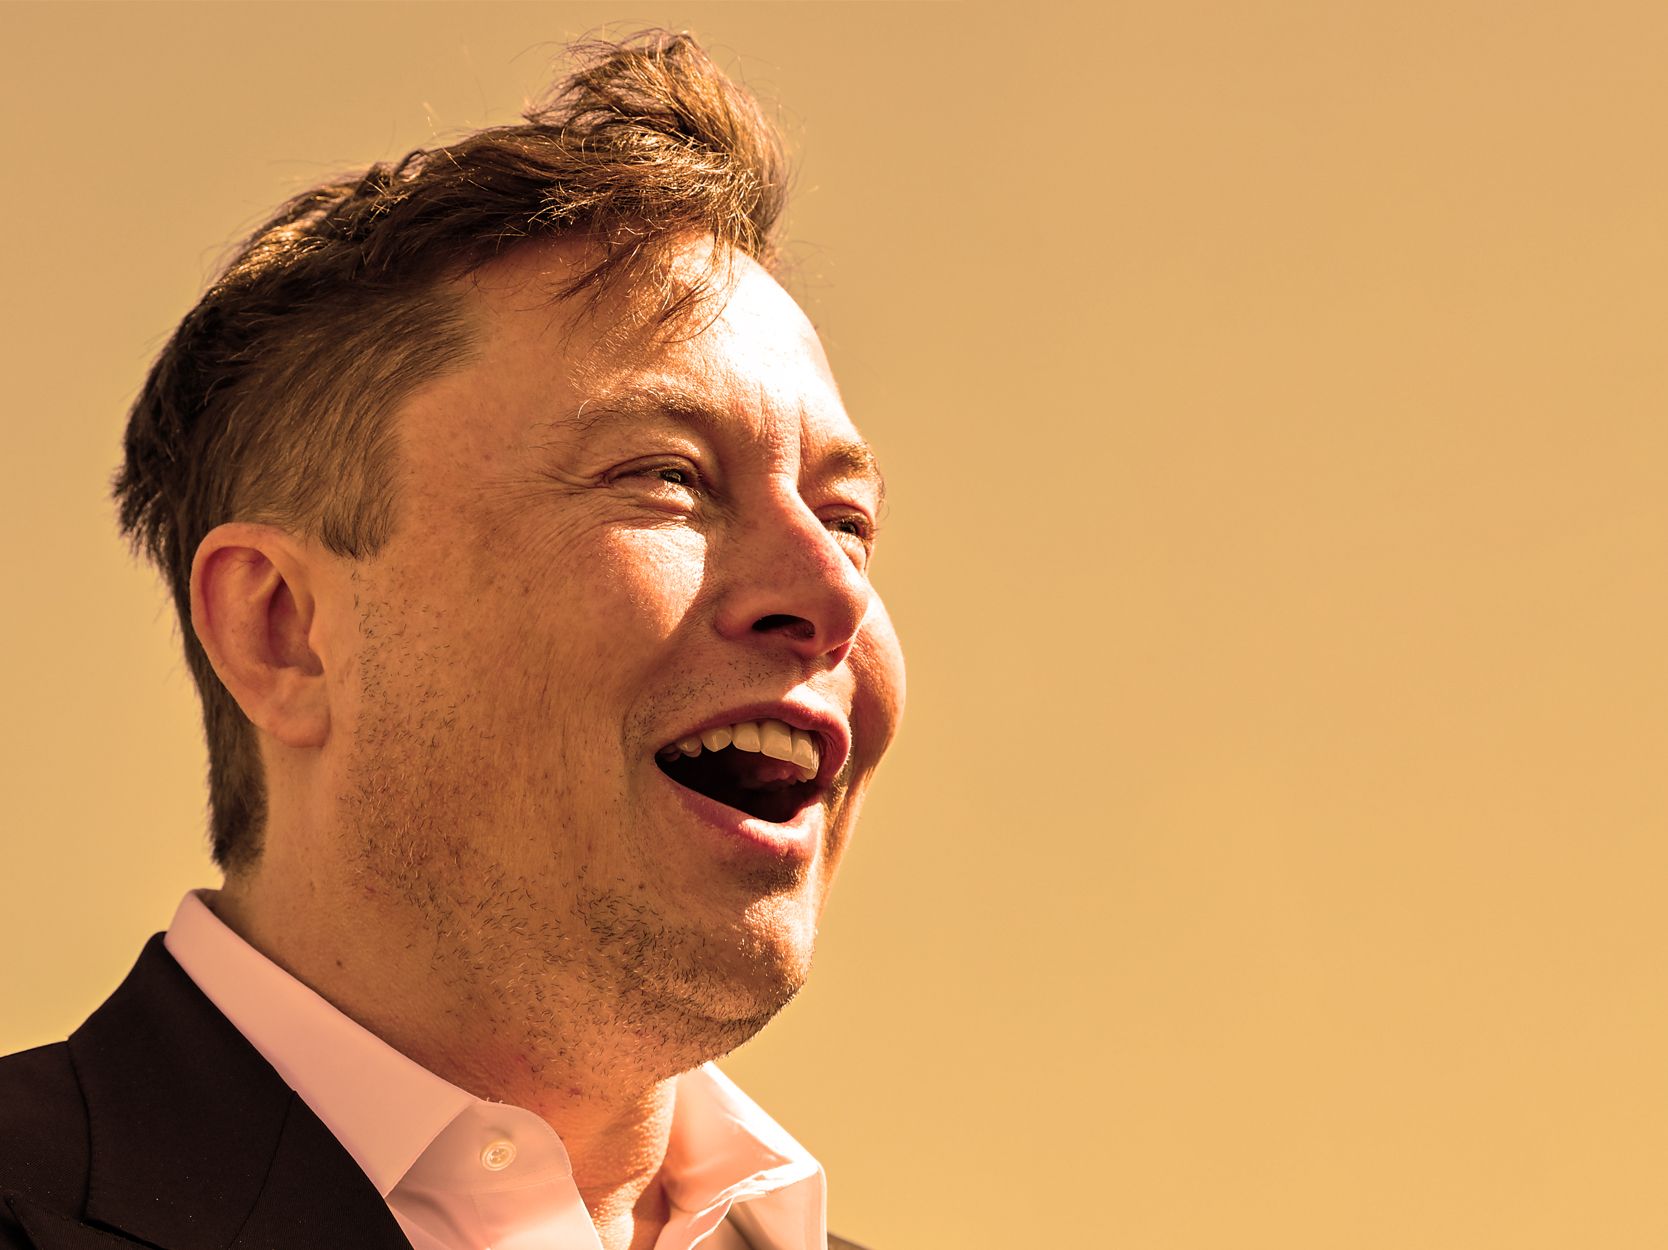 Elon Musk and Solar: He Says Sun Can Power All of Civilization